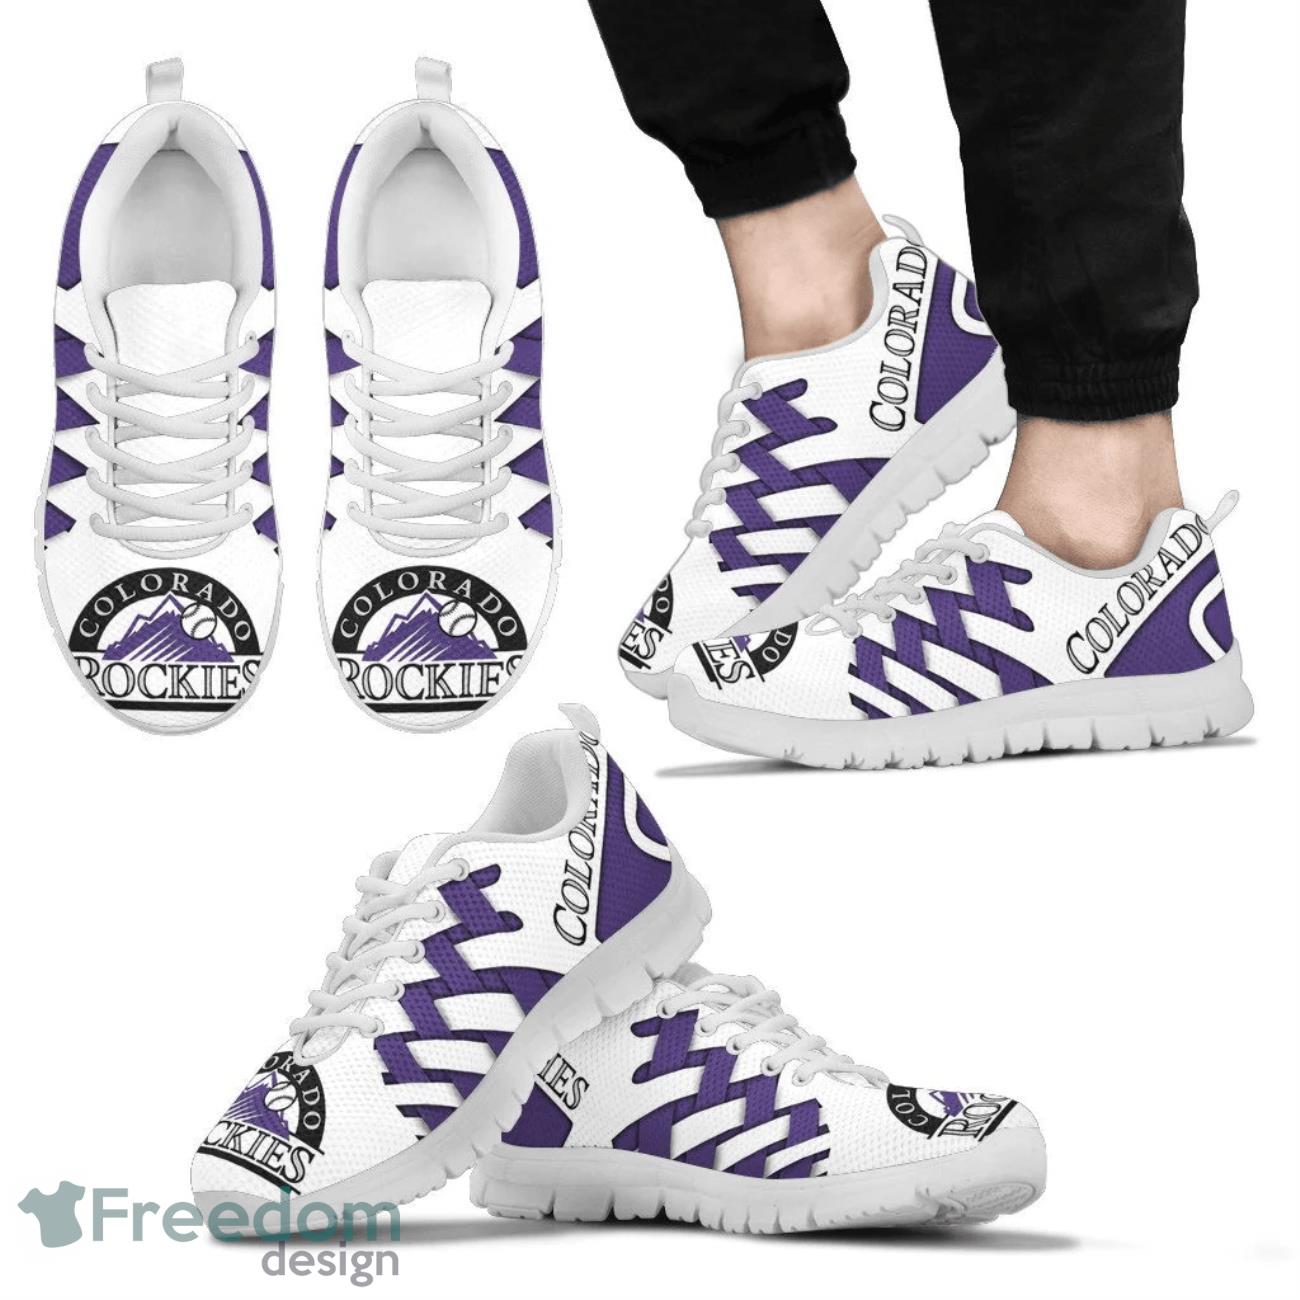 Colorado Rockies Logo Team Sneaker Shoes Gift For Fans Product Photo 2